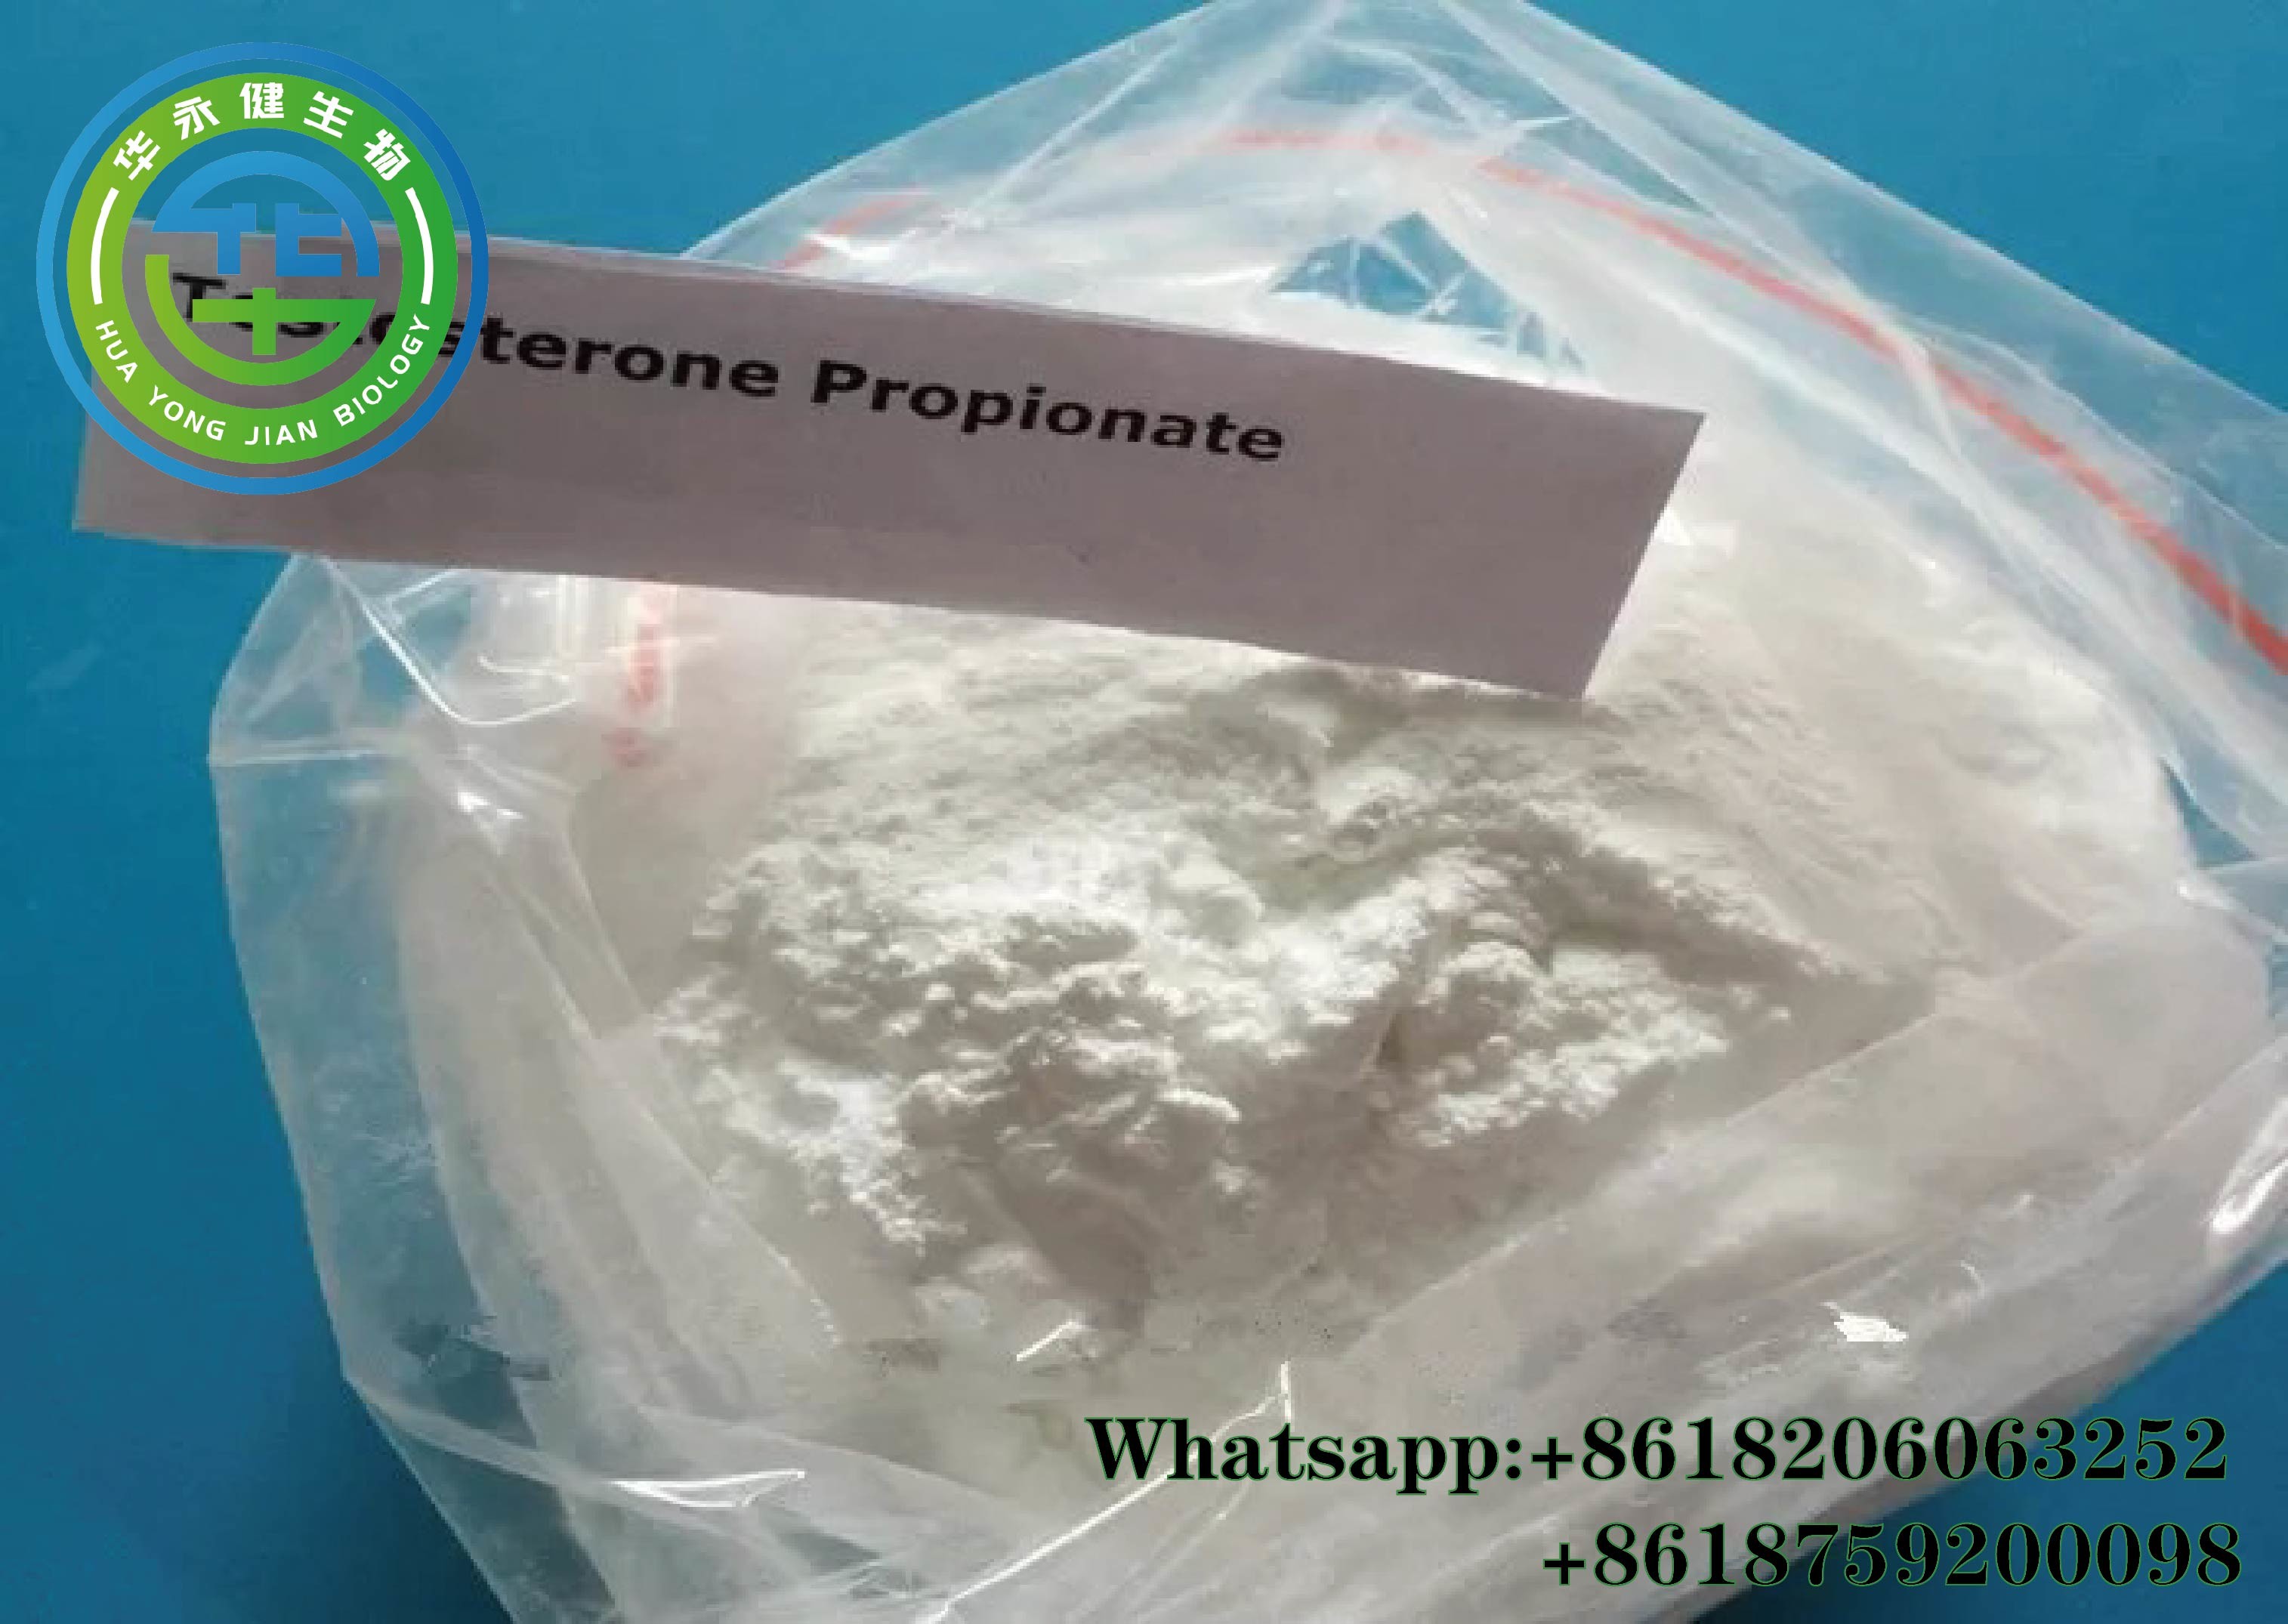 Wholesale Test Prop Muscle Building Steroids Testosterone Propionate Muscle Growth Steroids powder CAS 57-85-2 from china suppliers